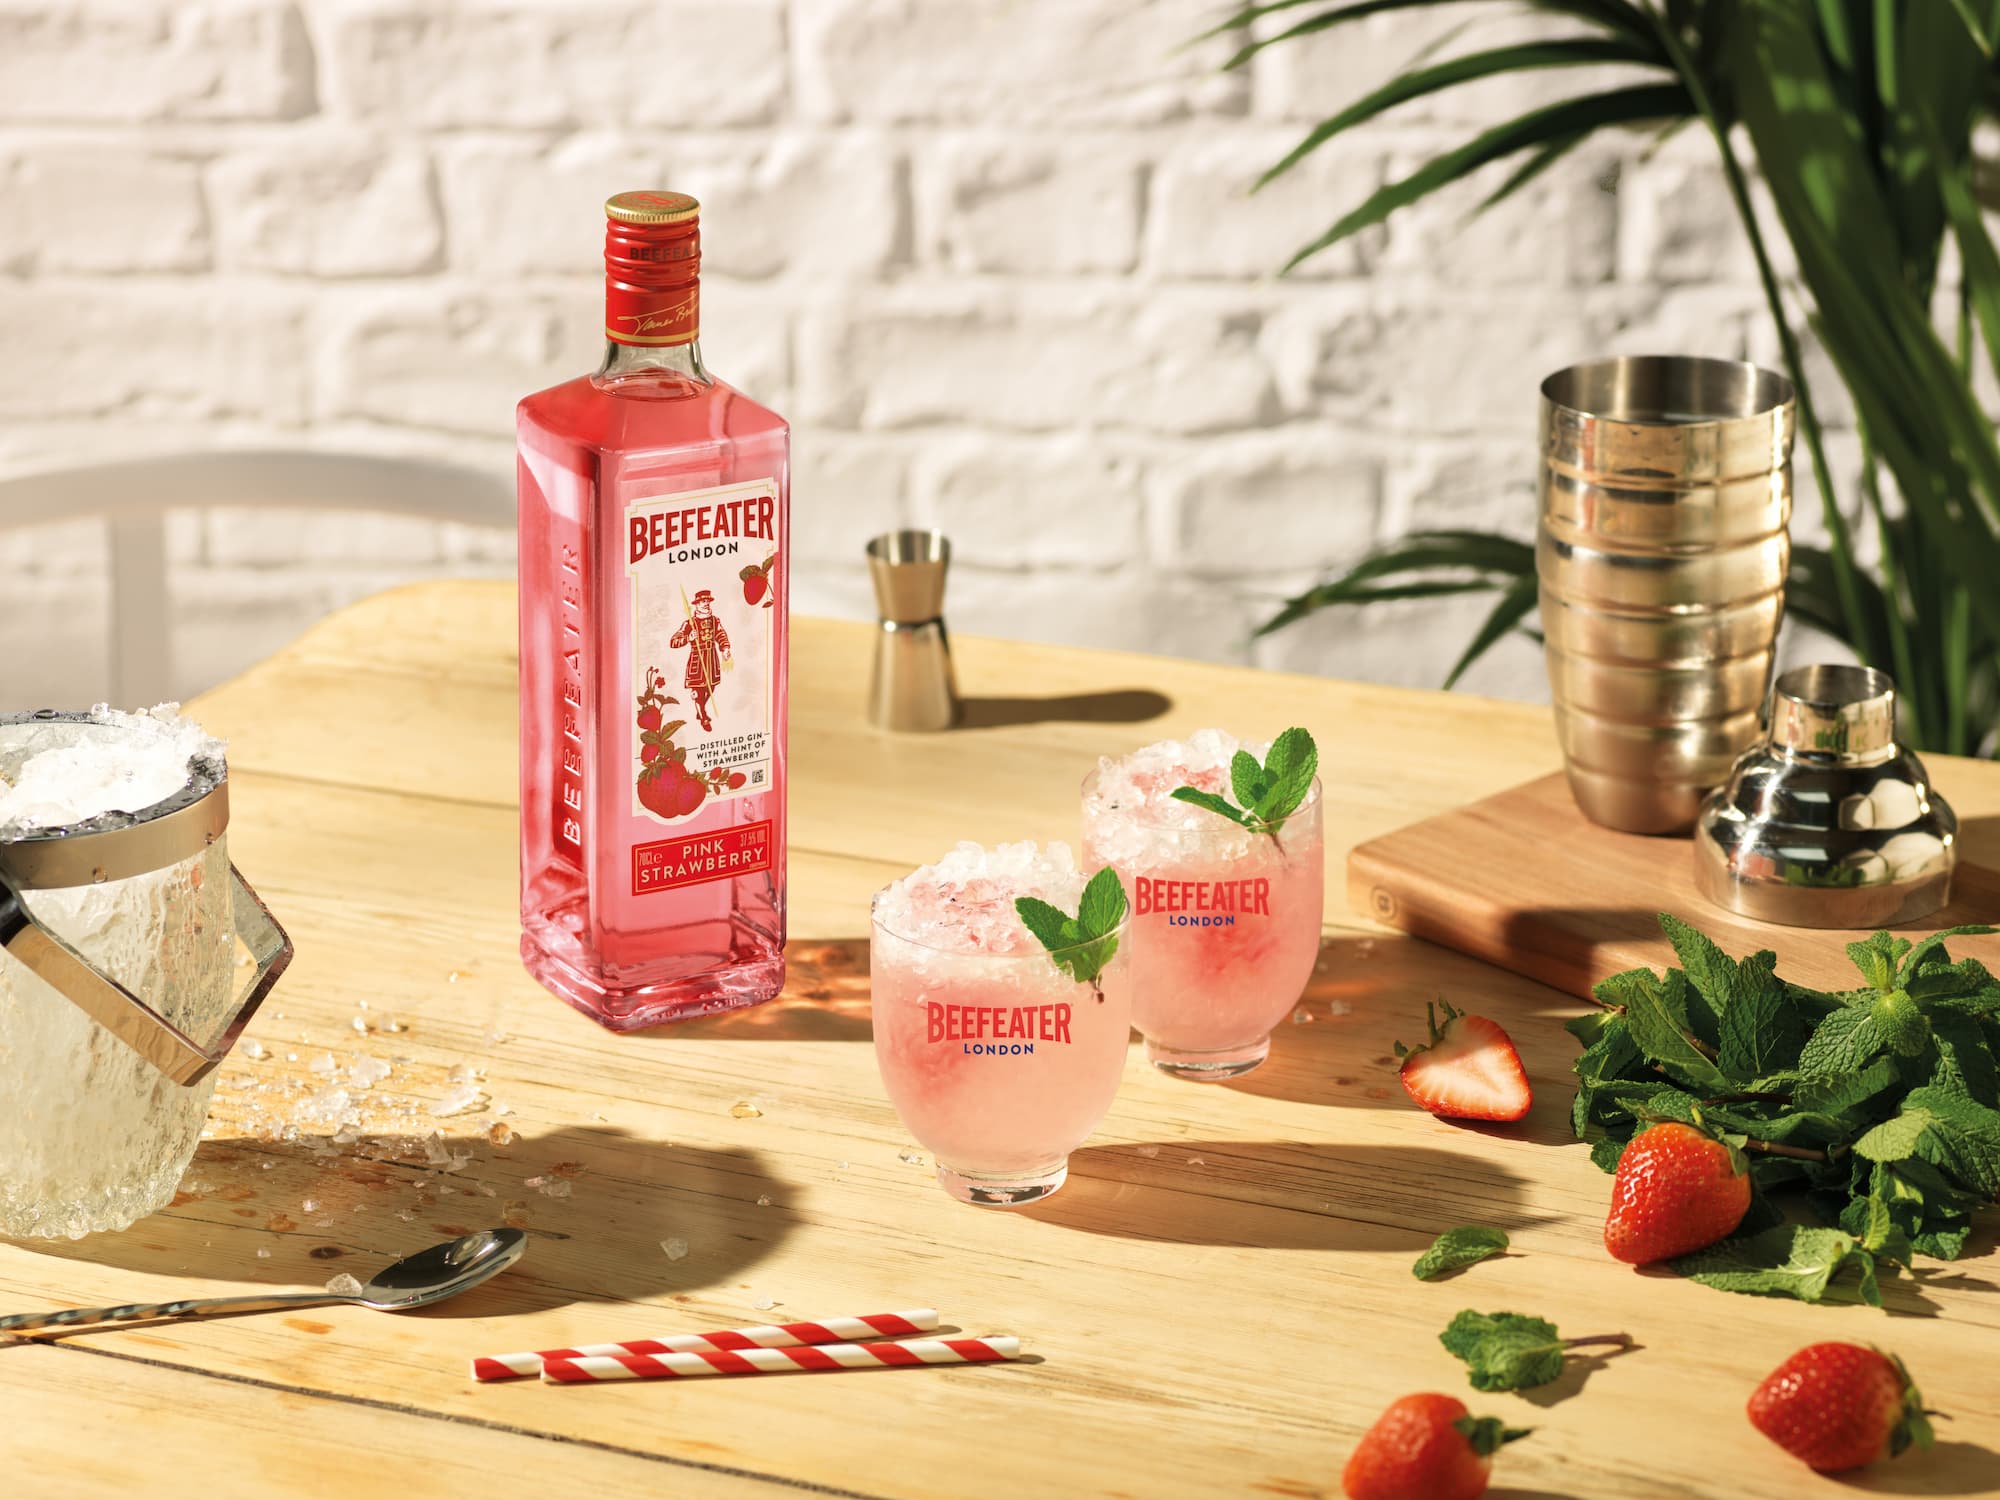 Pink Strawberry Bramble cocktail recipe - Beefeater Gin